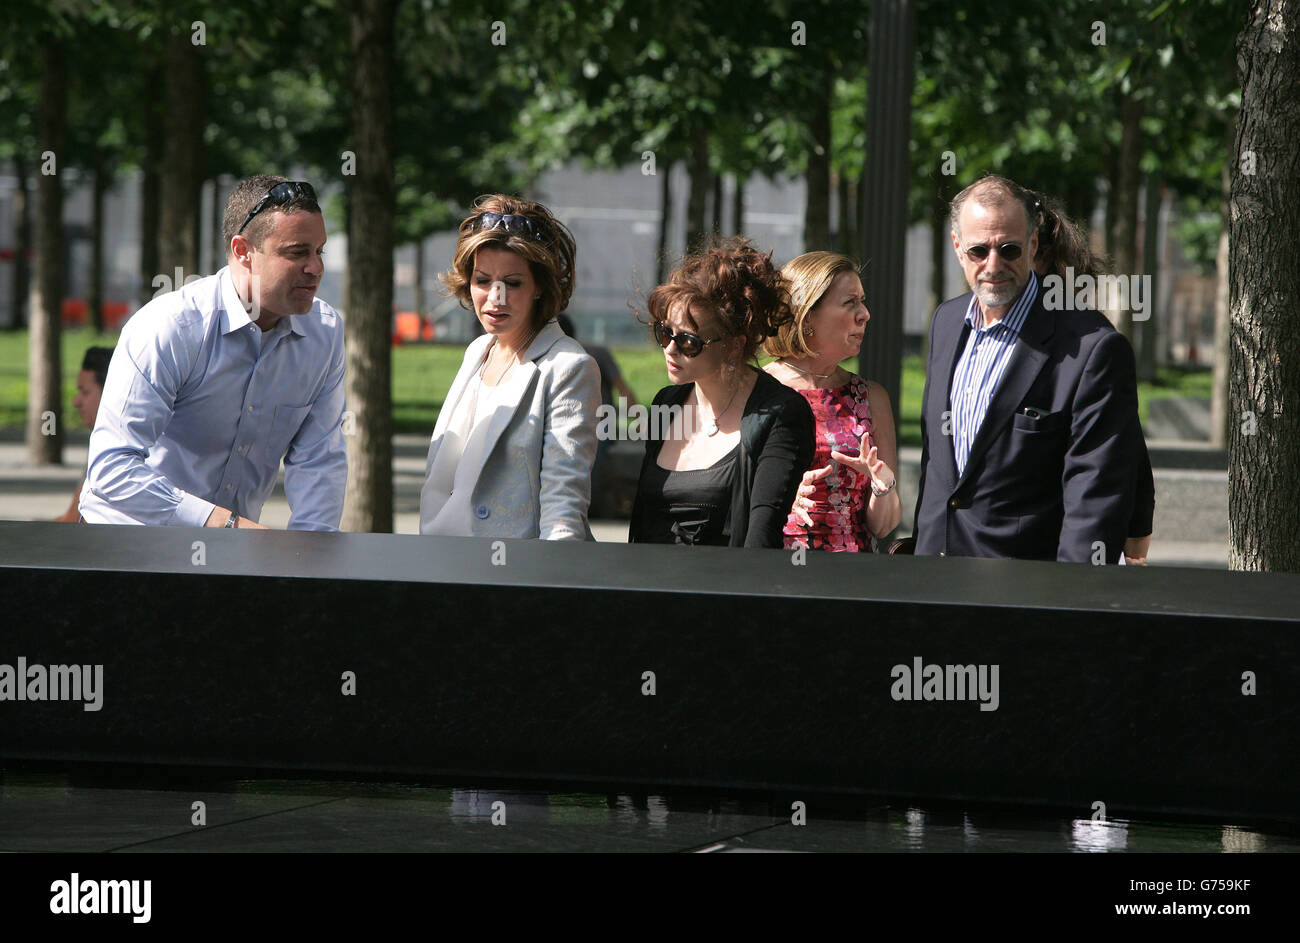 Members of the Prime Minister's Holocaust Commission Natasha Kaplinsky (second left), Helena Bonham Carter (centre) and Mick Davis (right) during a visit to the 9/11 memorial and Memorial Museum in New York, USA. Stock Photo